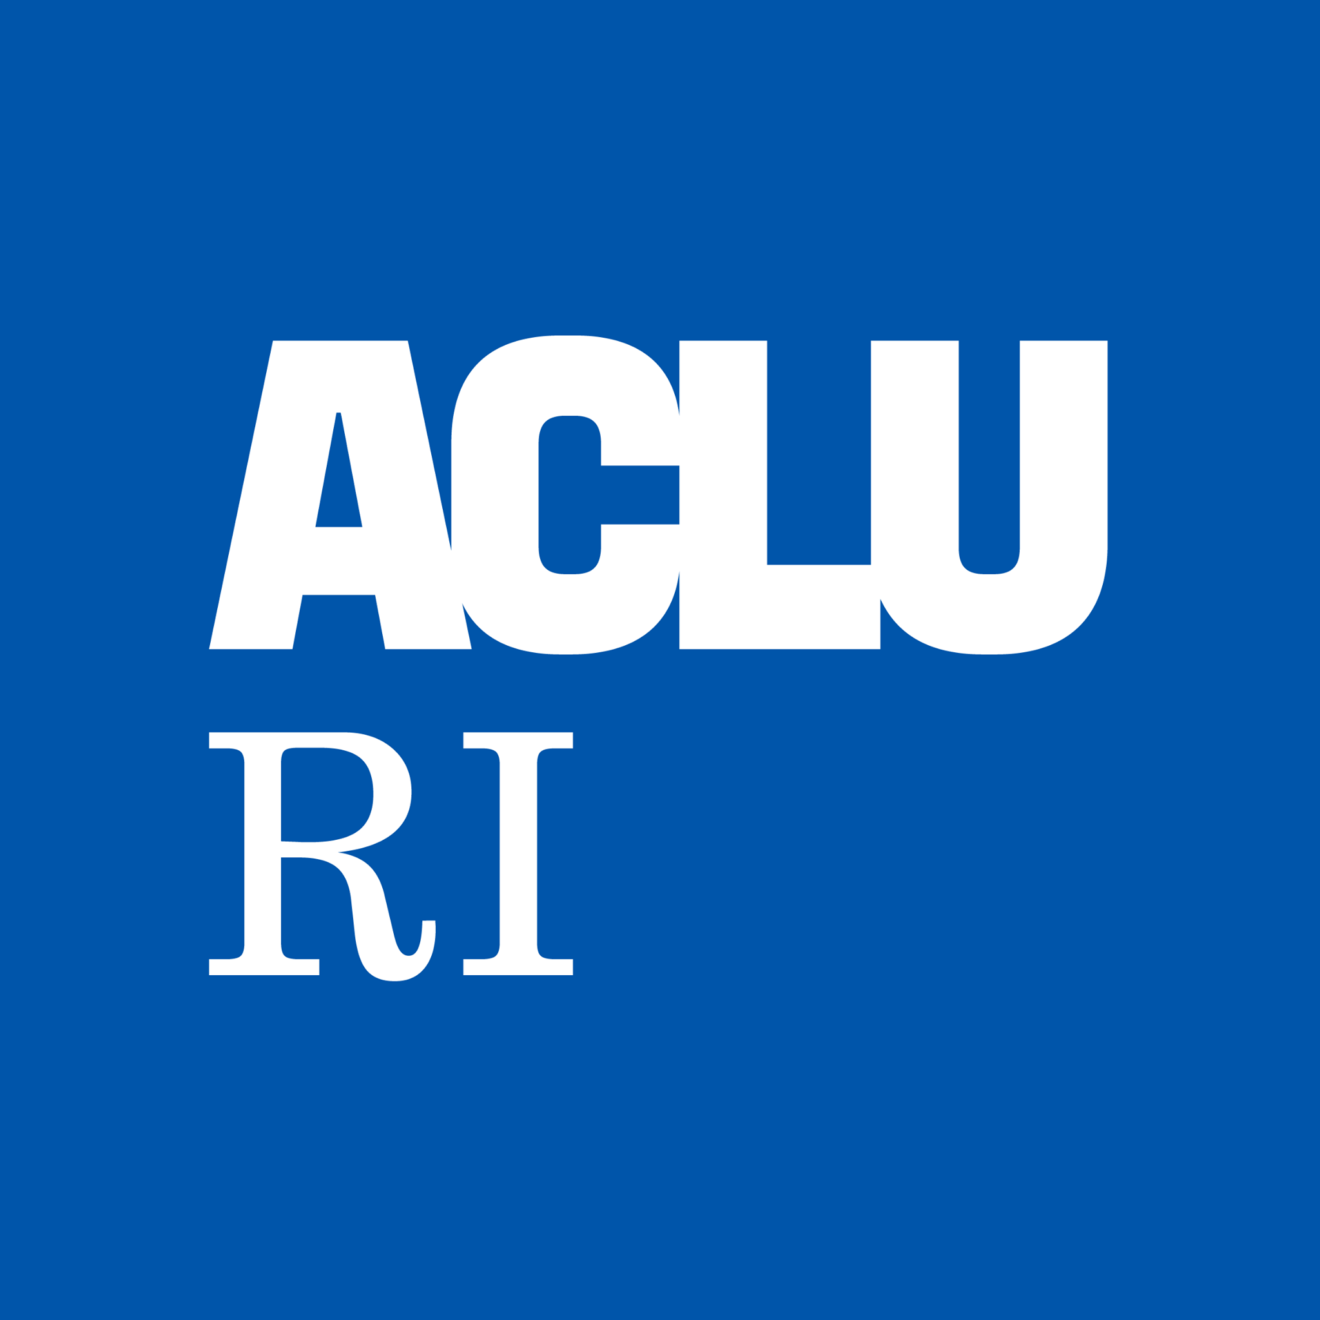 RI ACLU Urges Town Council To Go Slow On Action To Overturn Planning Commission Elections